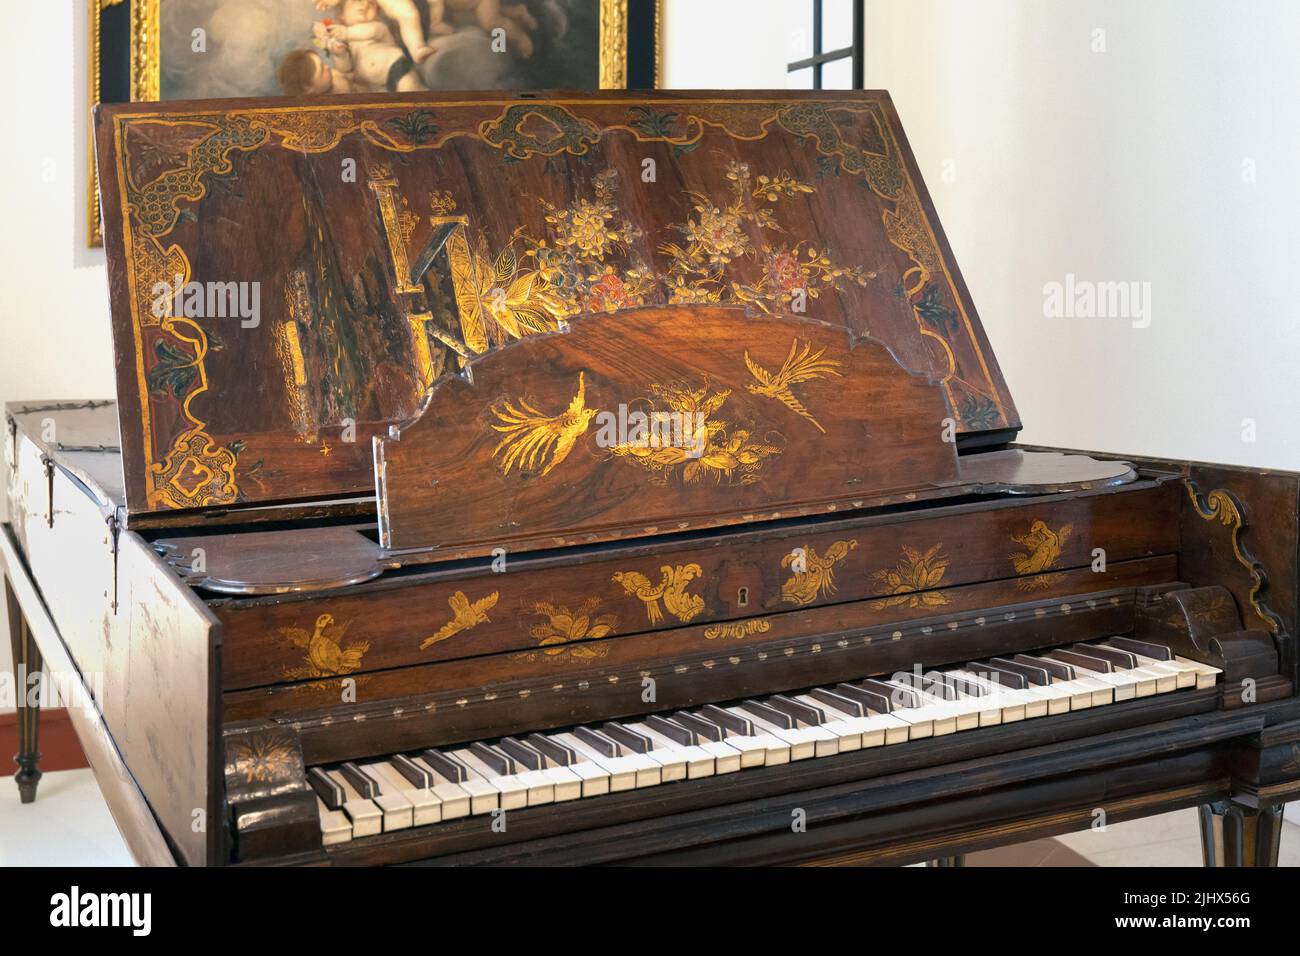 Piano, circa 1750, attributed to Francisco Perez Mirabel who was active in Seville, Spain in the mid 18th century.  On display in the Museo de Belles Stock Photo